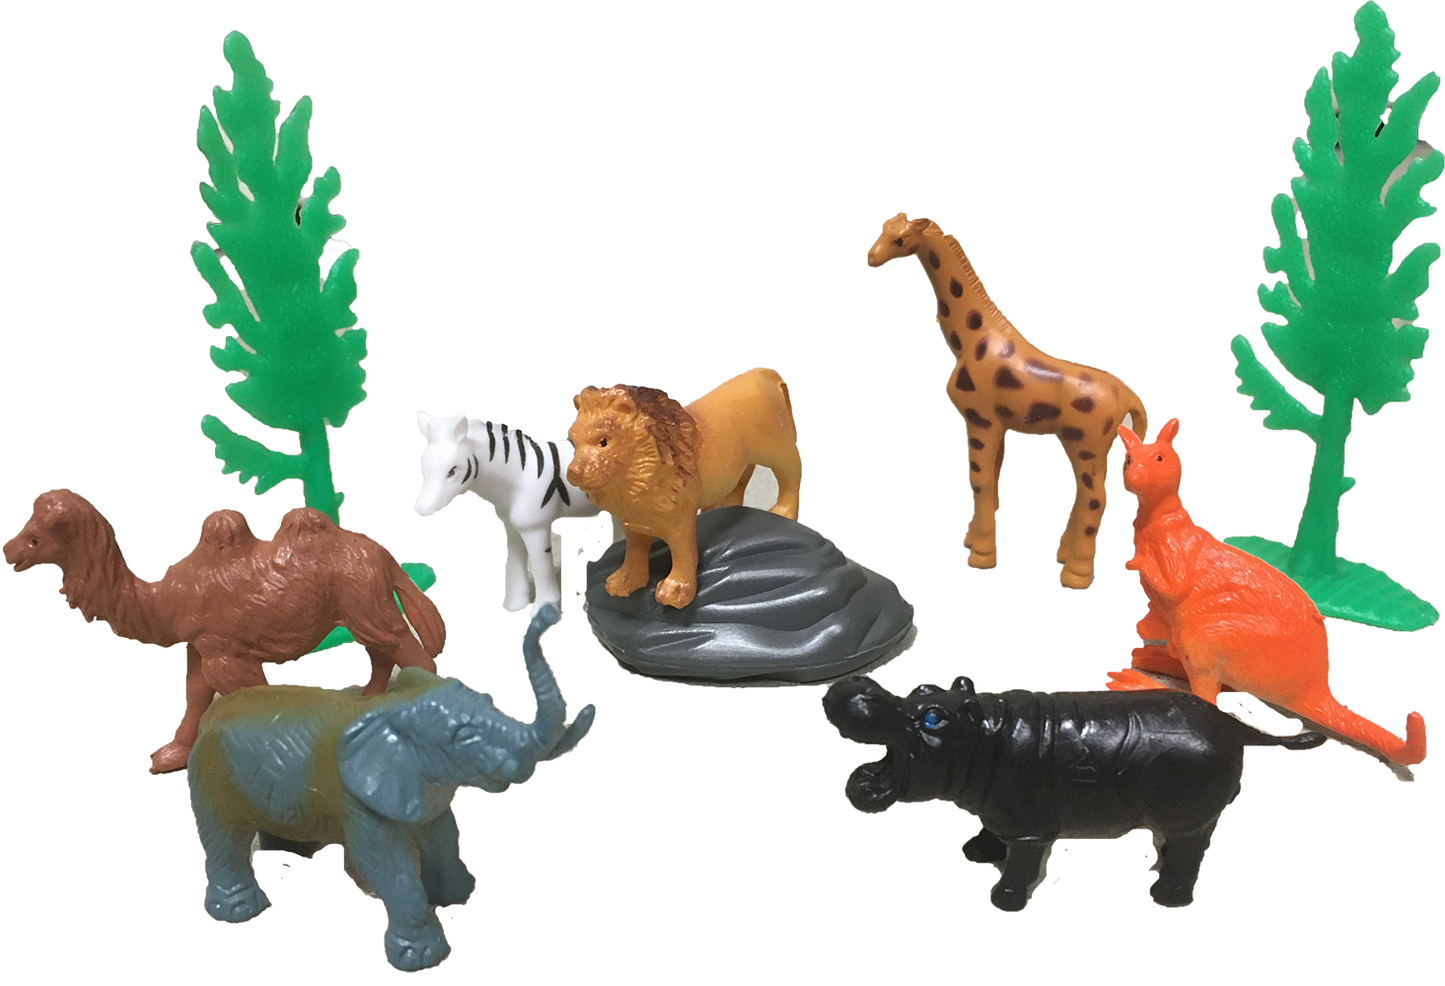 Zoo Animal Figurines in Clear Tube with Lion Head Topper